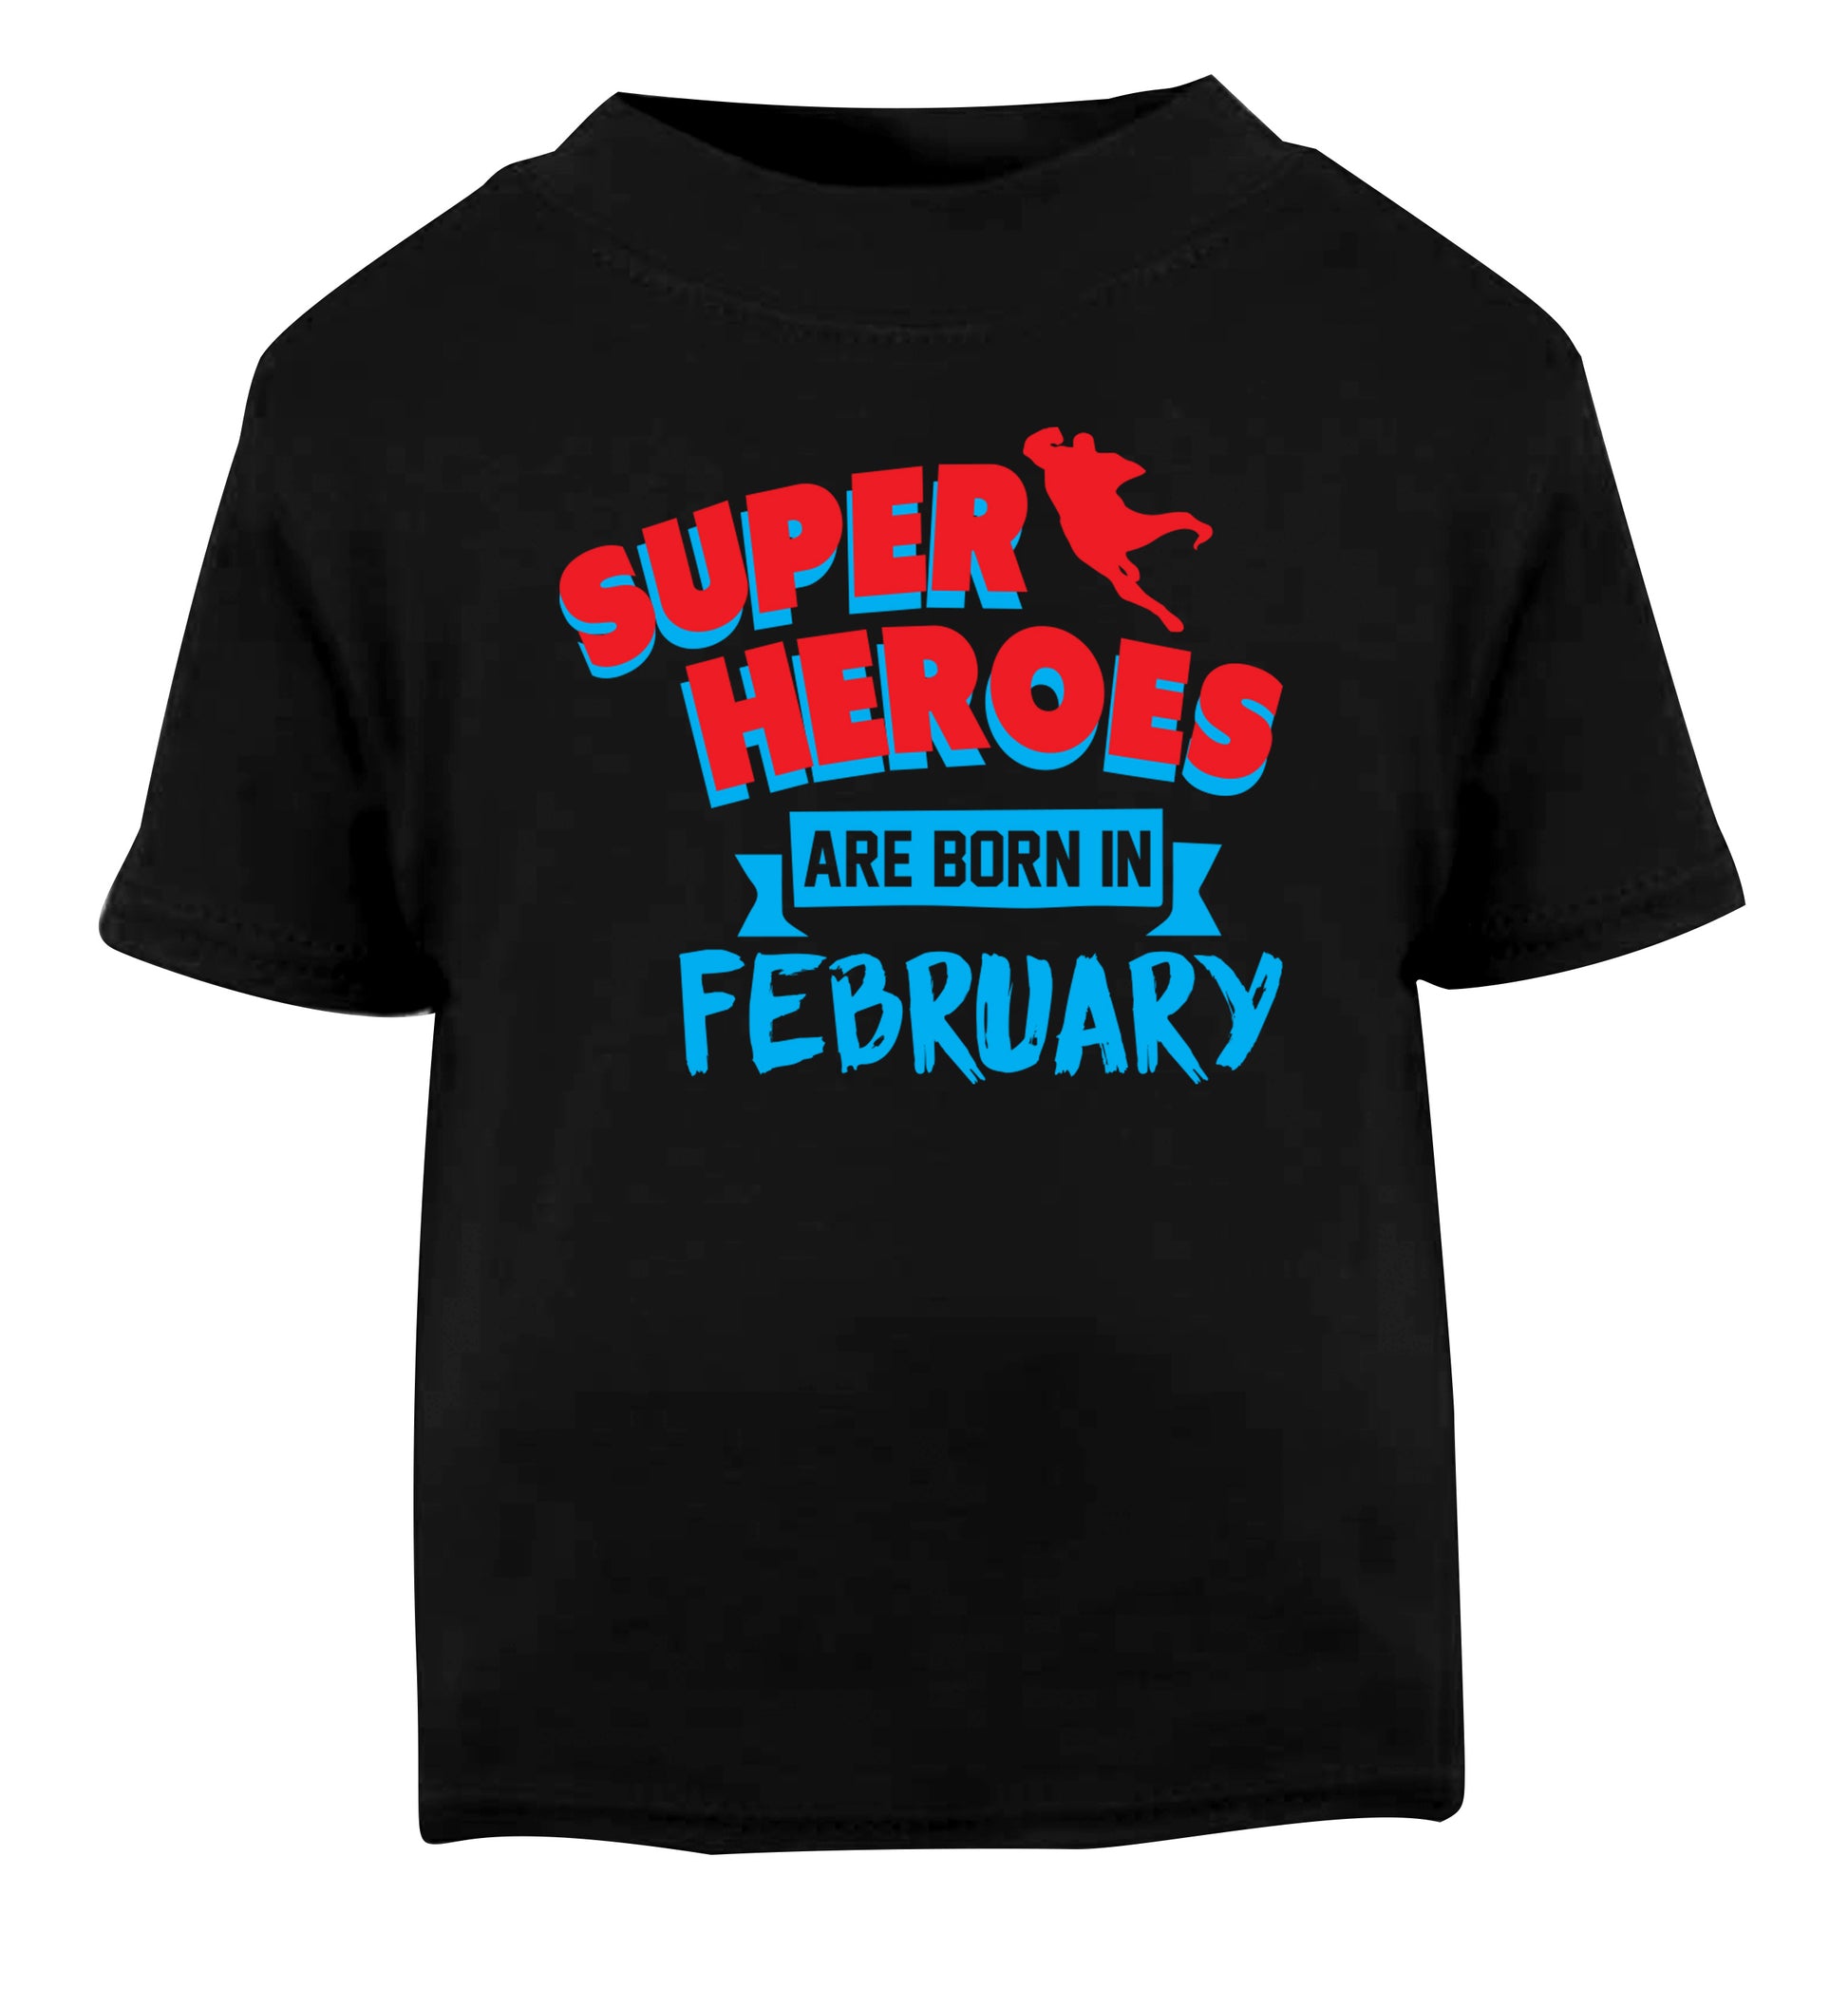 superheroes are born in February Black Baby Toddler Tshirt 2 years